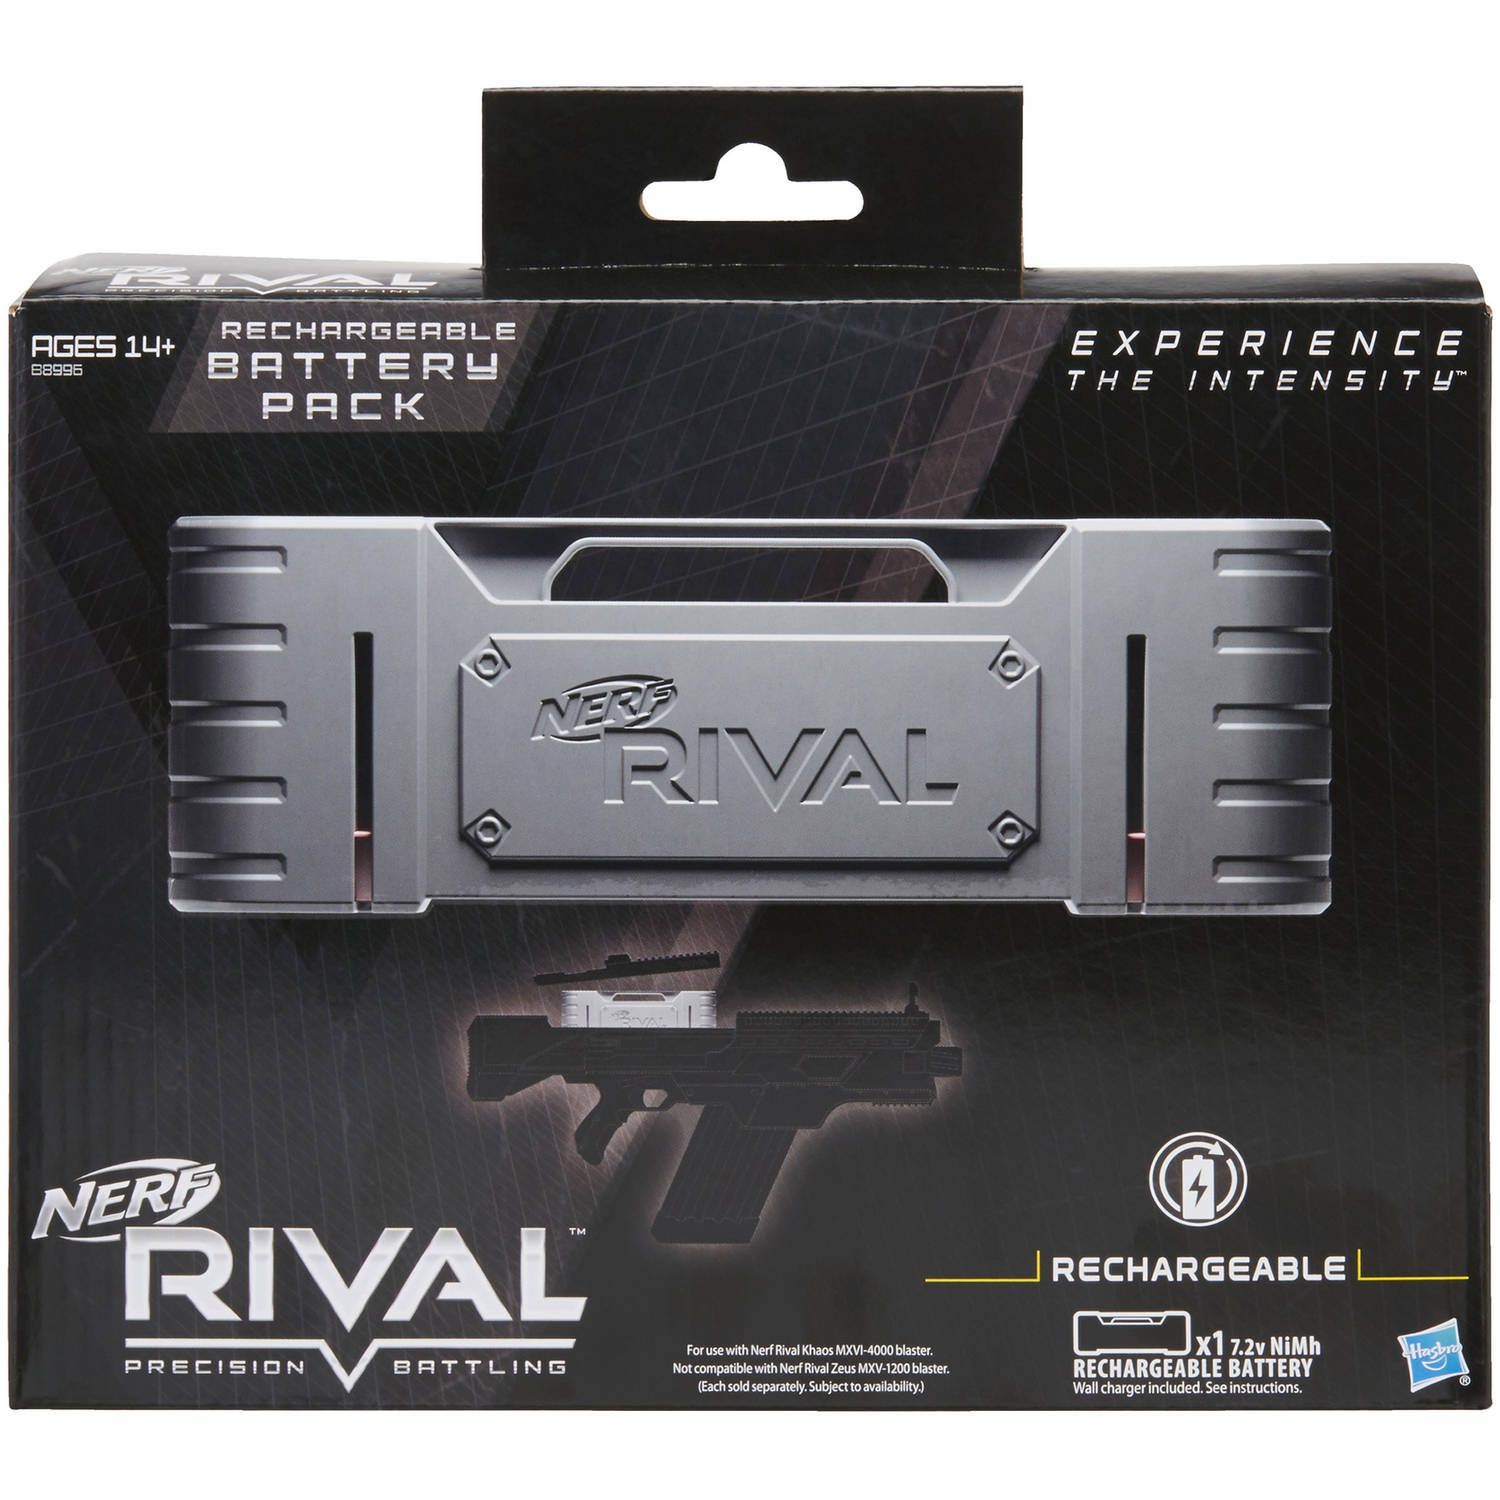 NERF Rival Rechargeable Battery Pack – NERF VIỆT NAM